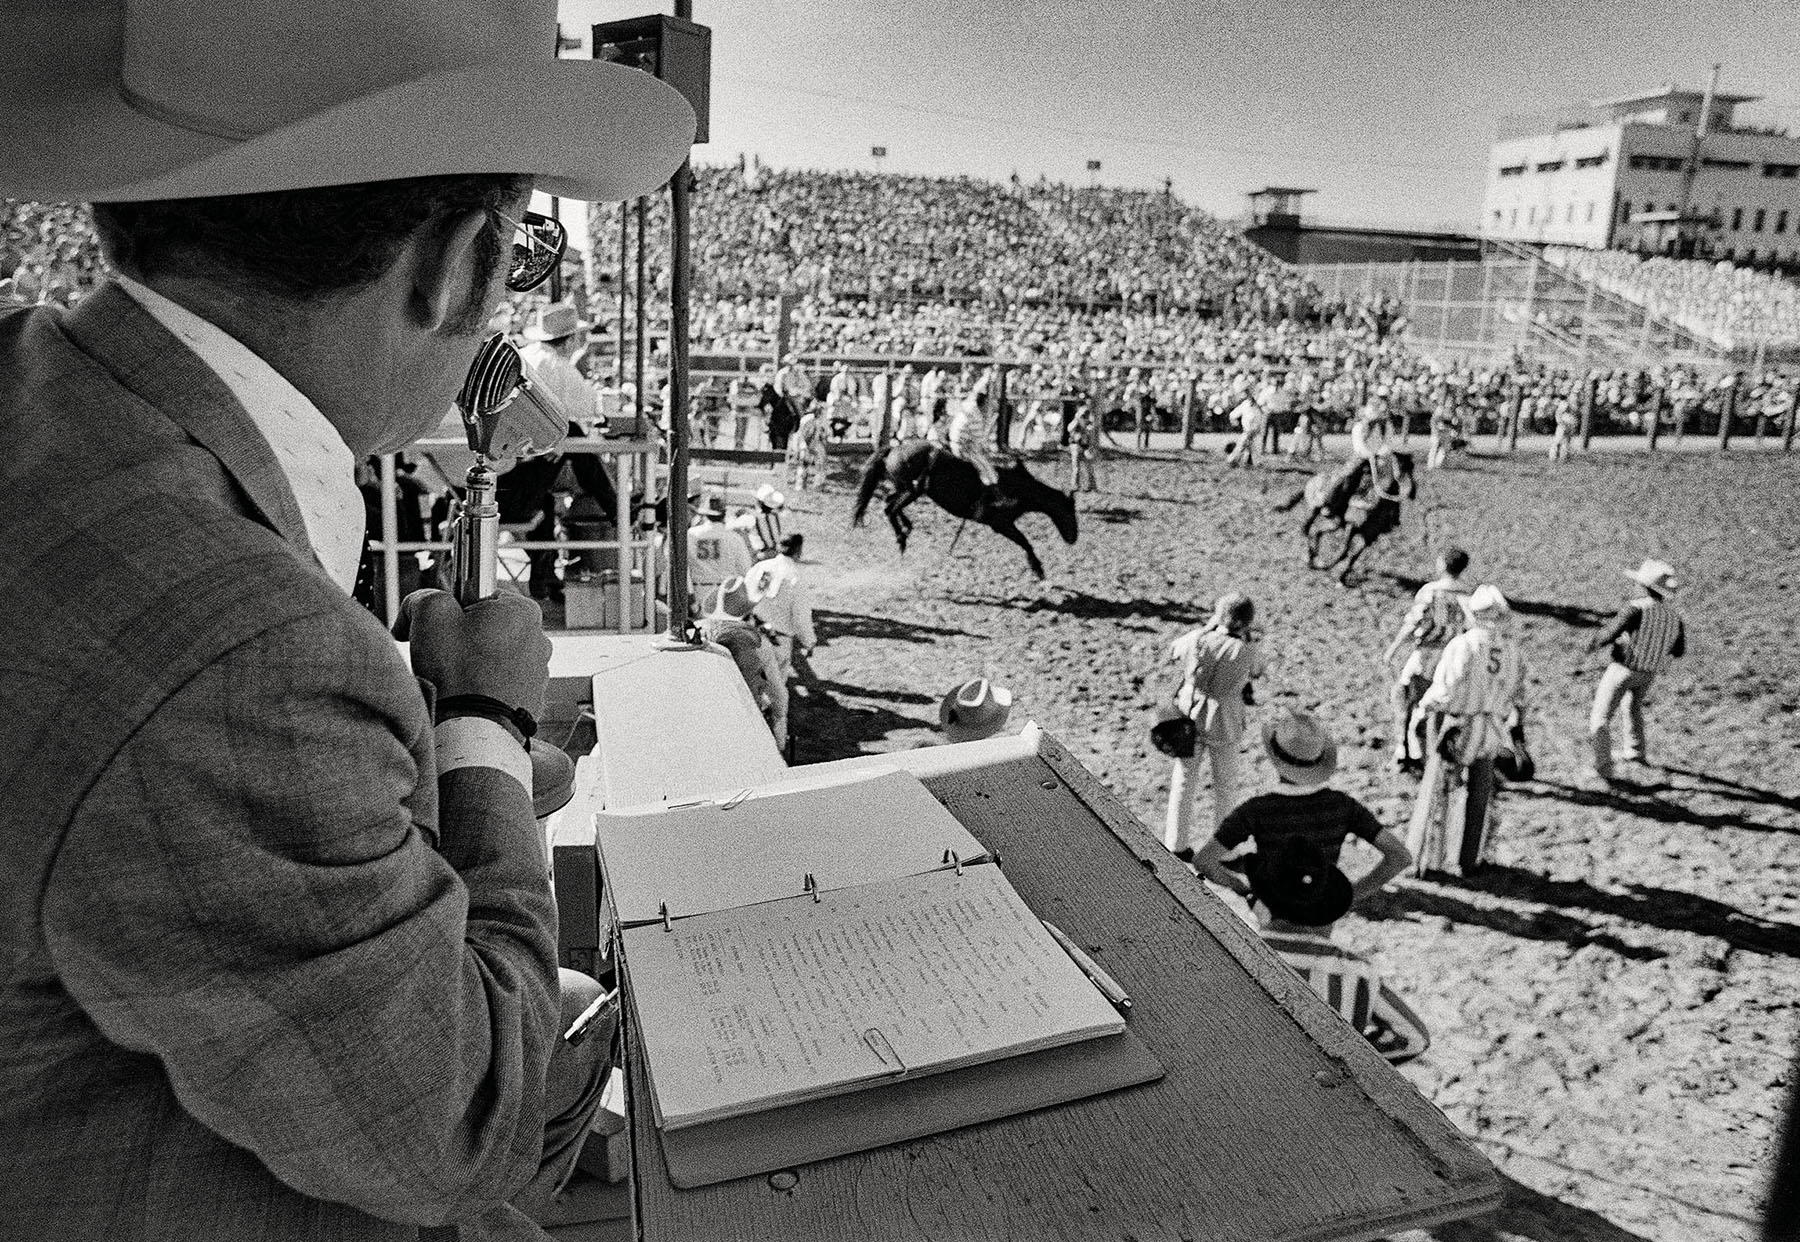 A man wearing a cowboy hat looks down over a dirt field of cowboys and wranglers participating in a rodeo